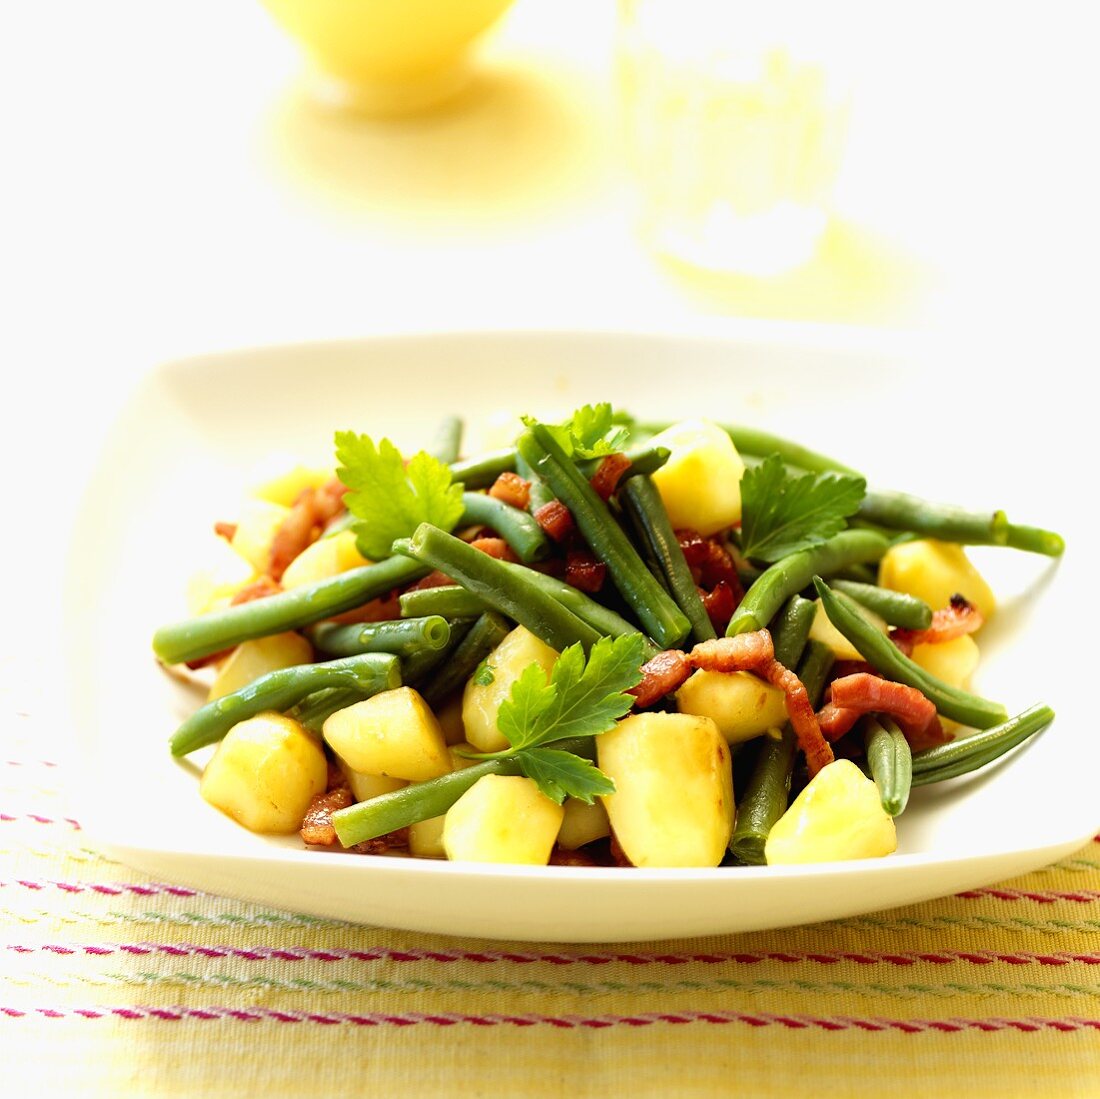 Pan-cooked potatoes and bacon with green beans